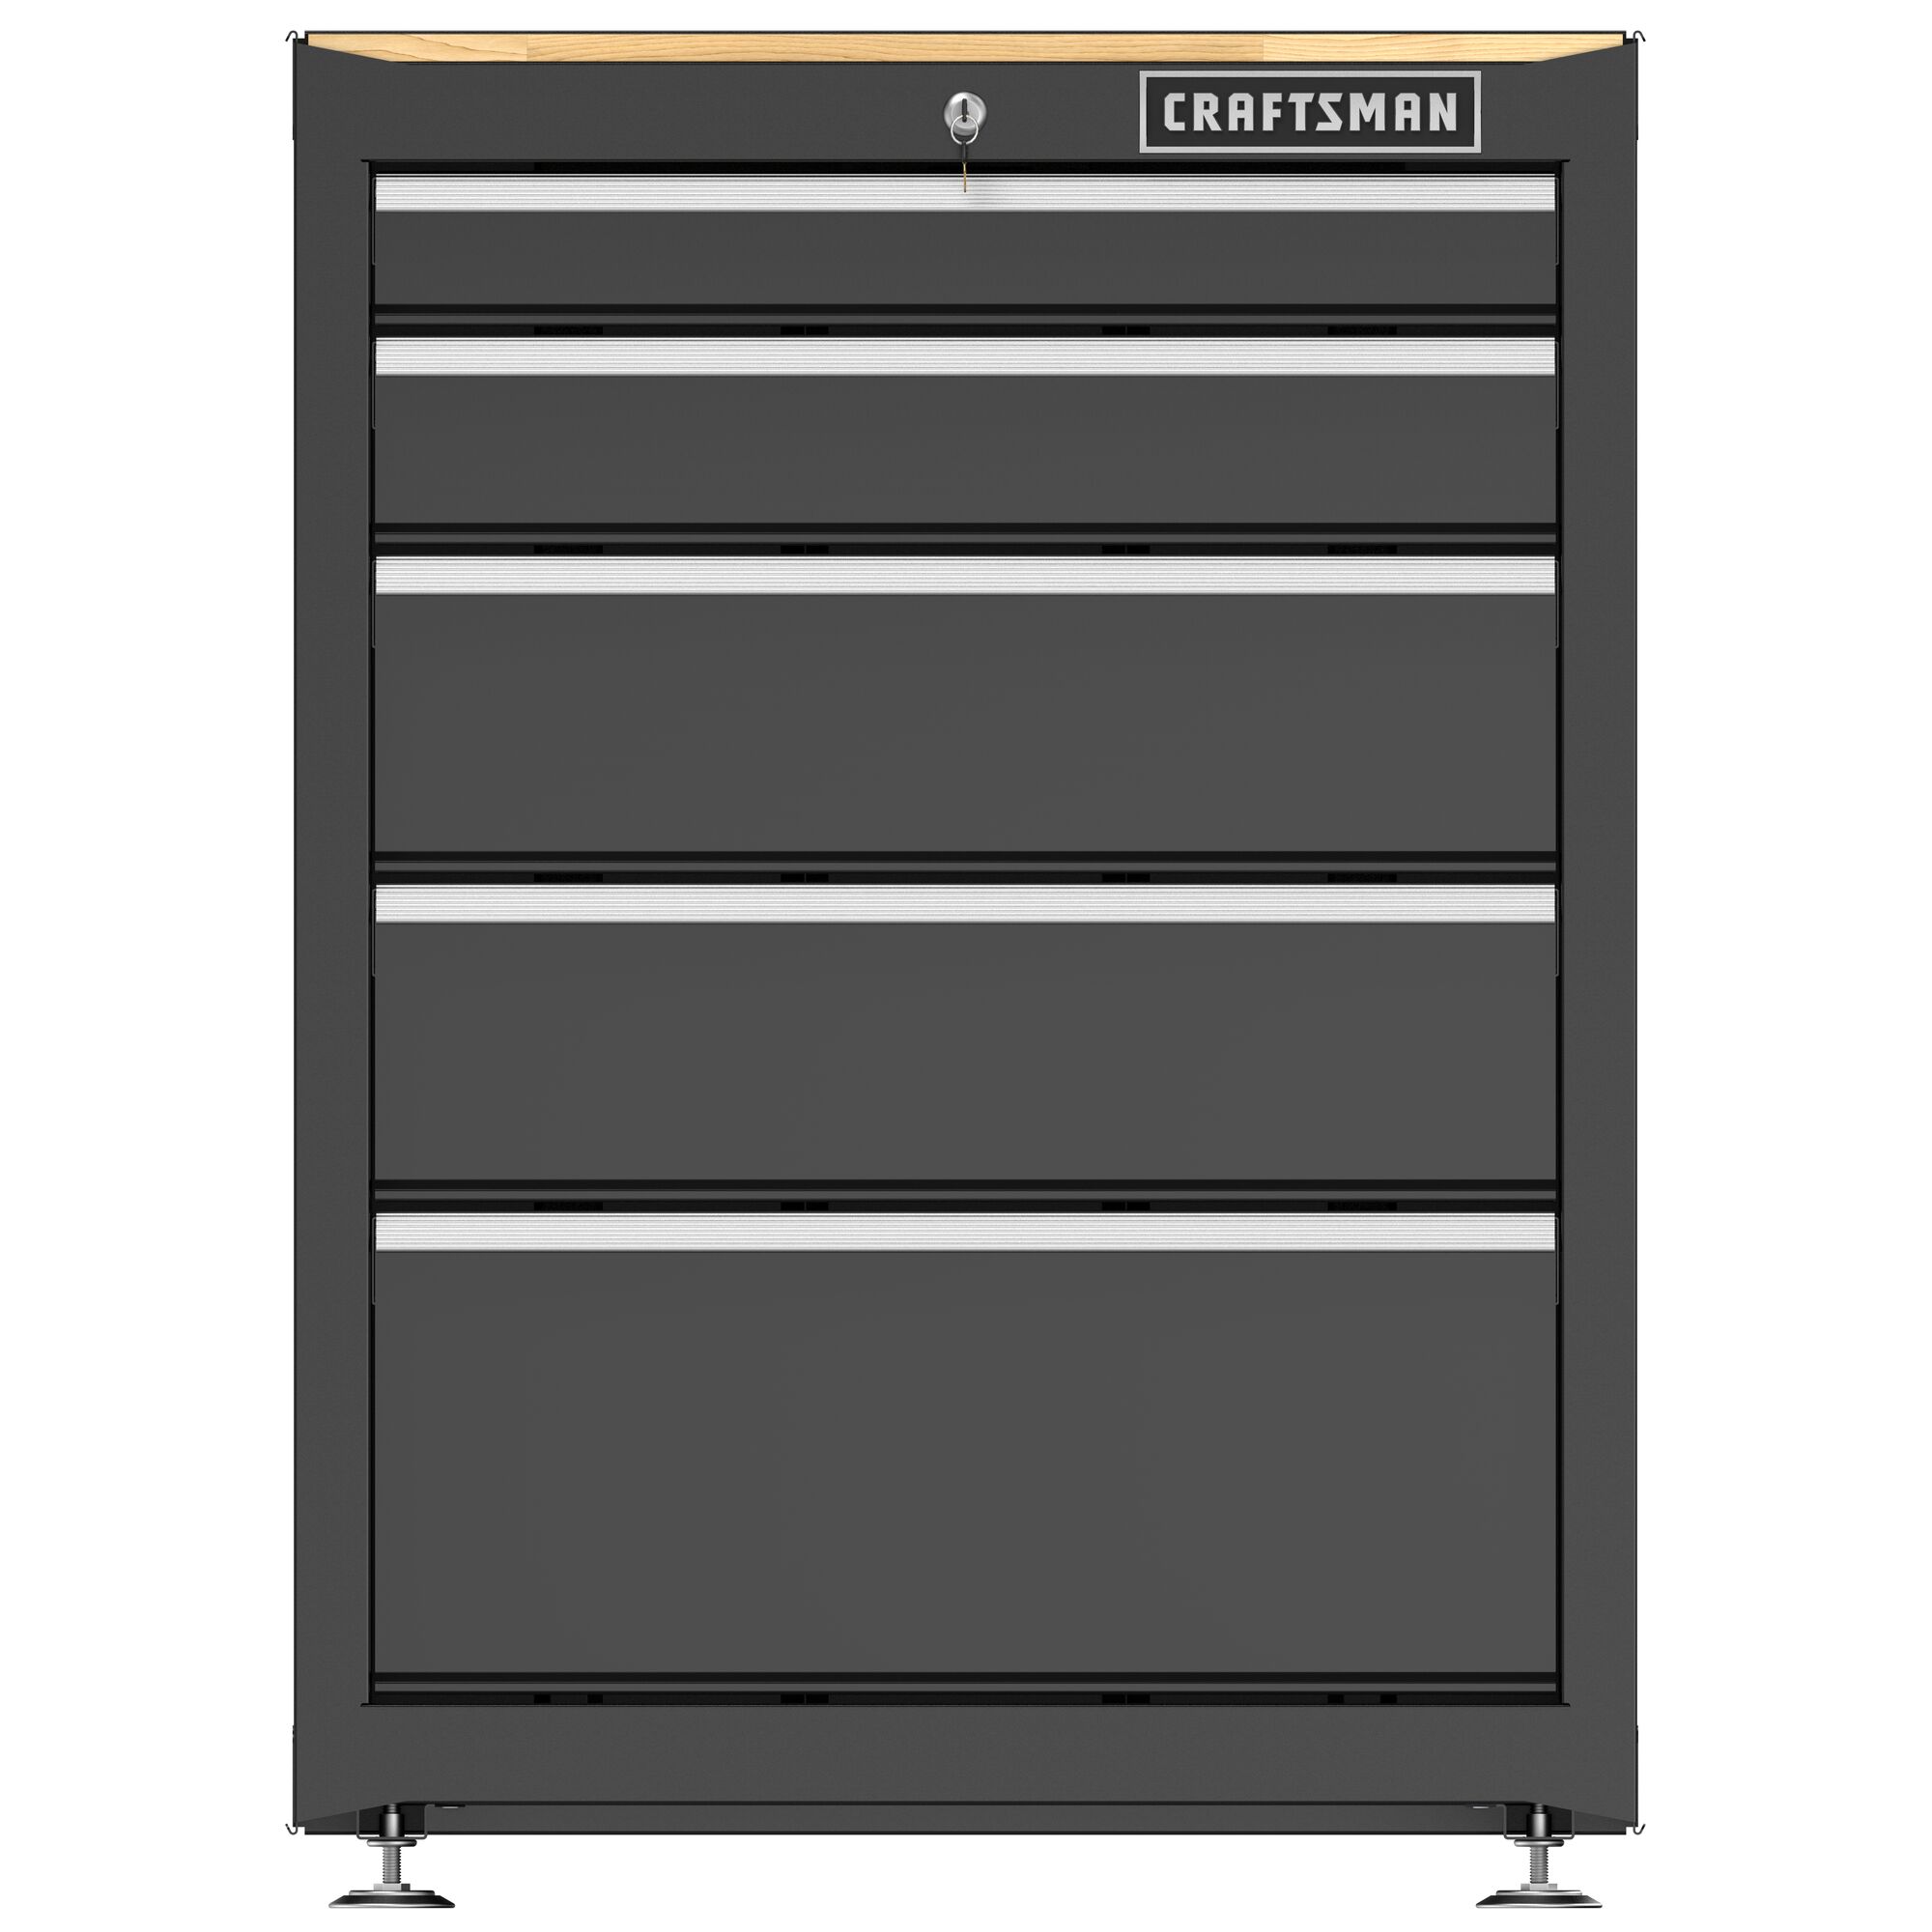 CRAFTSMAN 26.5-in wide 5-drawer base cabinet straight forward view